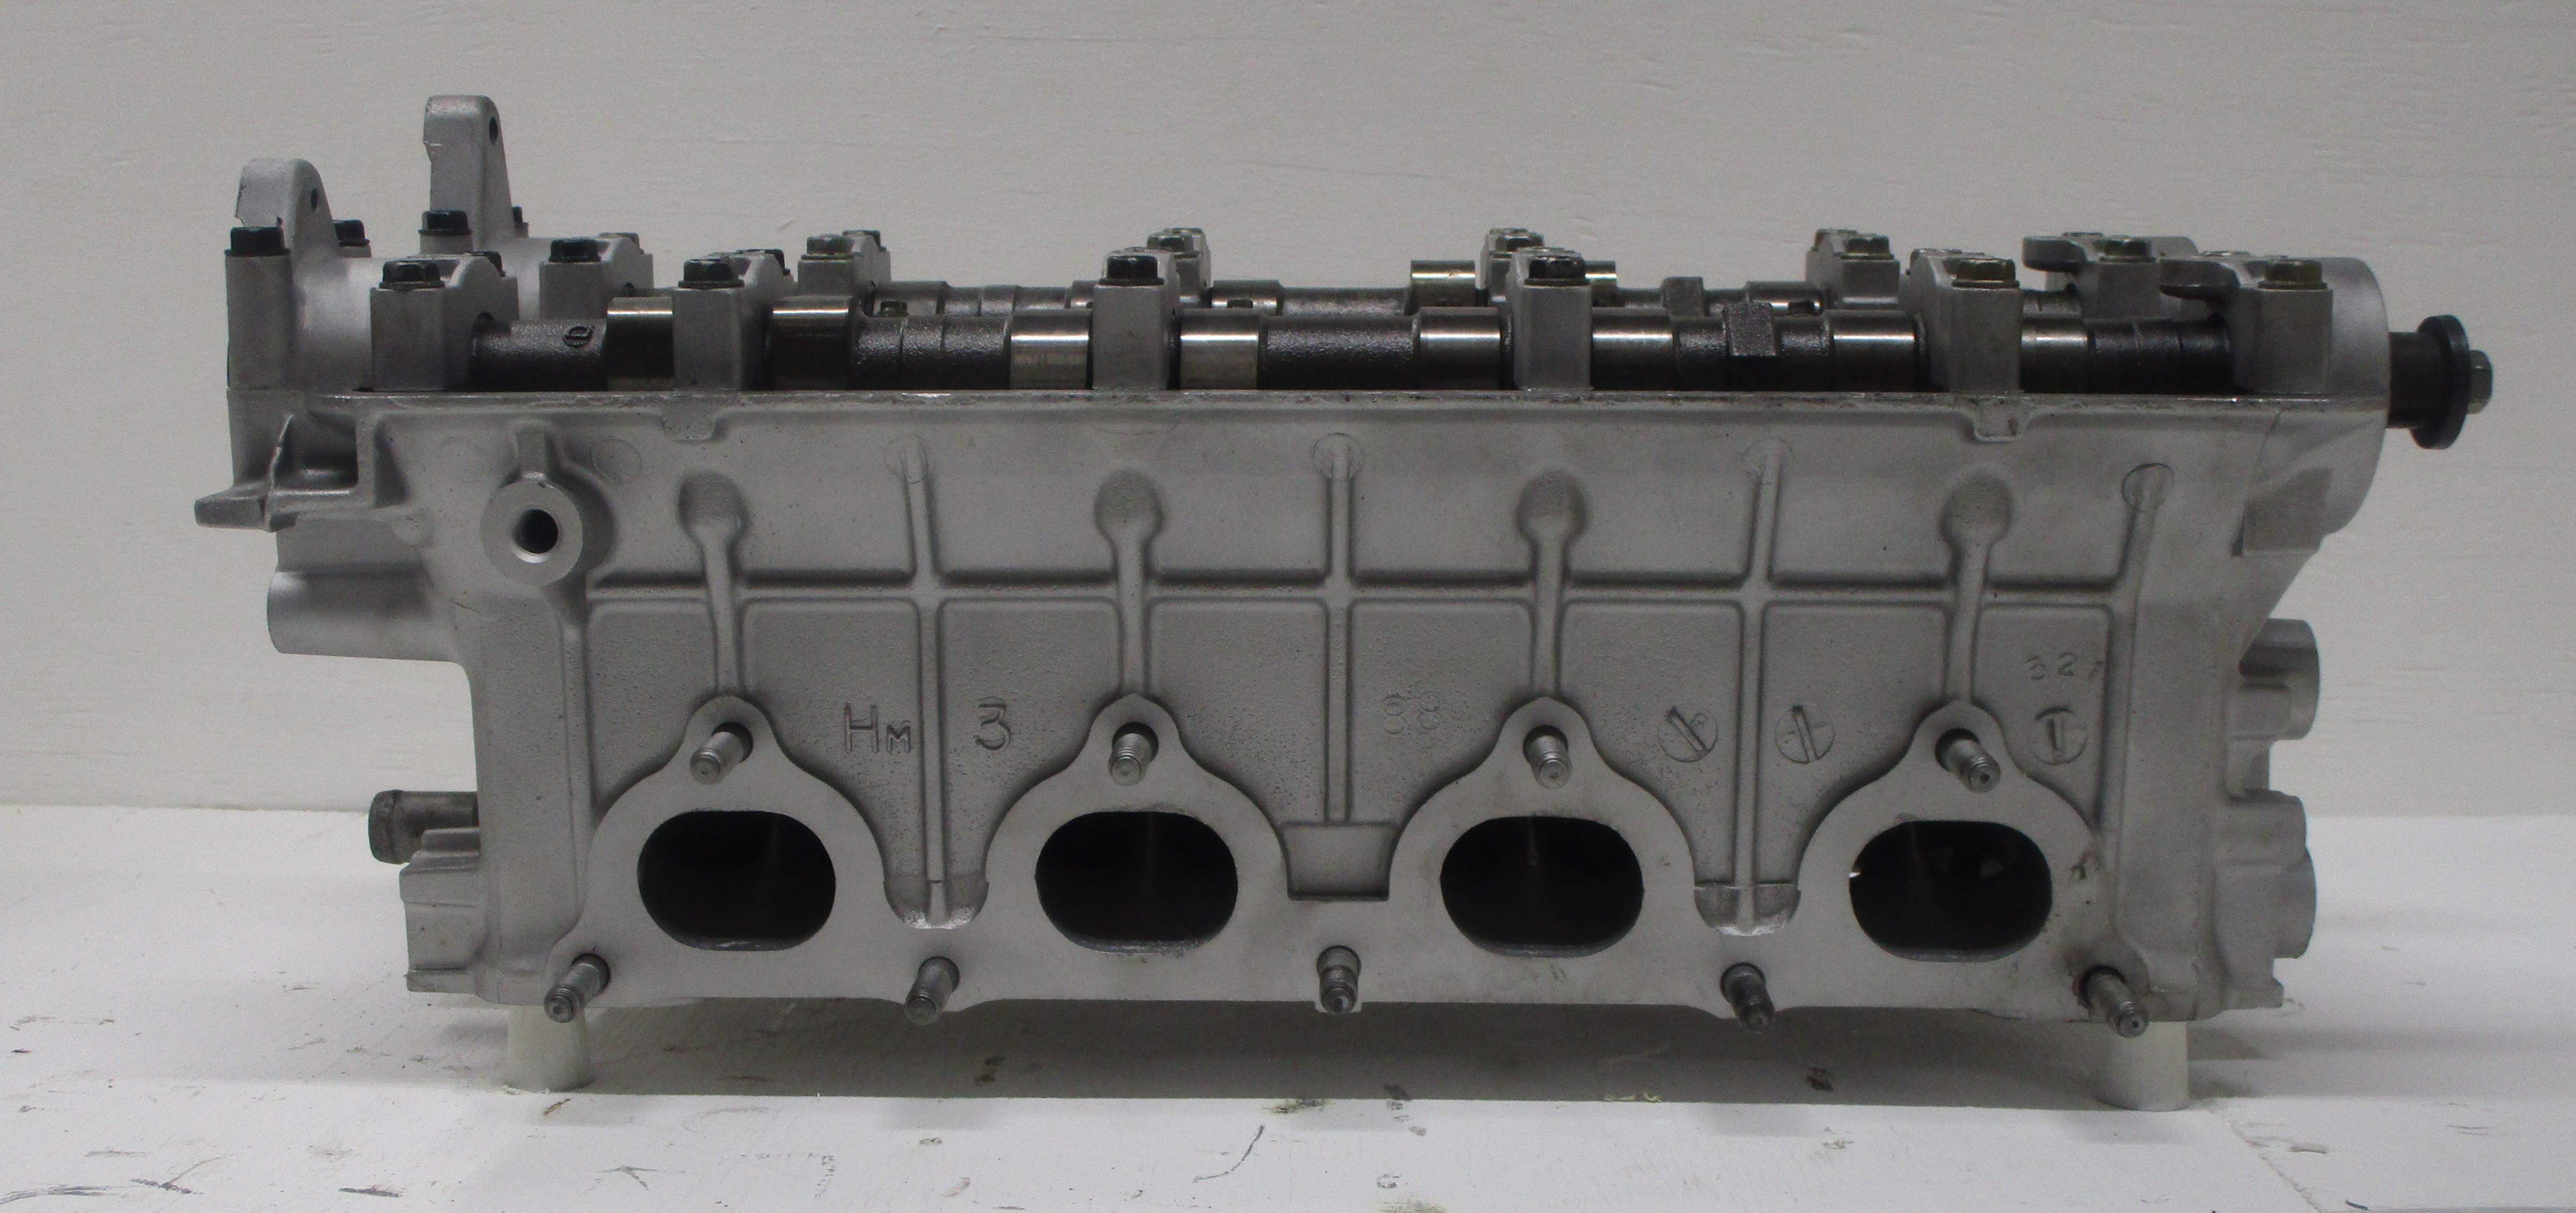 1988-1989 Acura Integra 1.6L (D16A1) Reconditioned Cylinder Head w/Cams ($100 Core Charge)